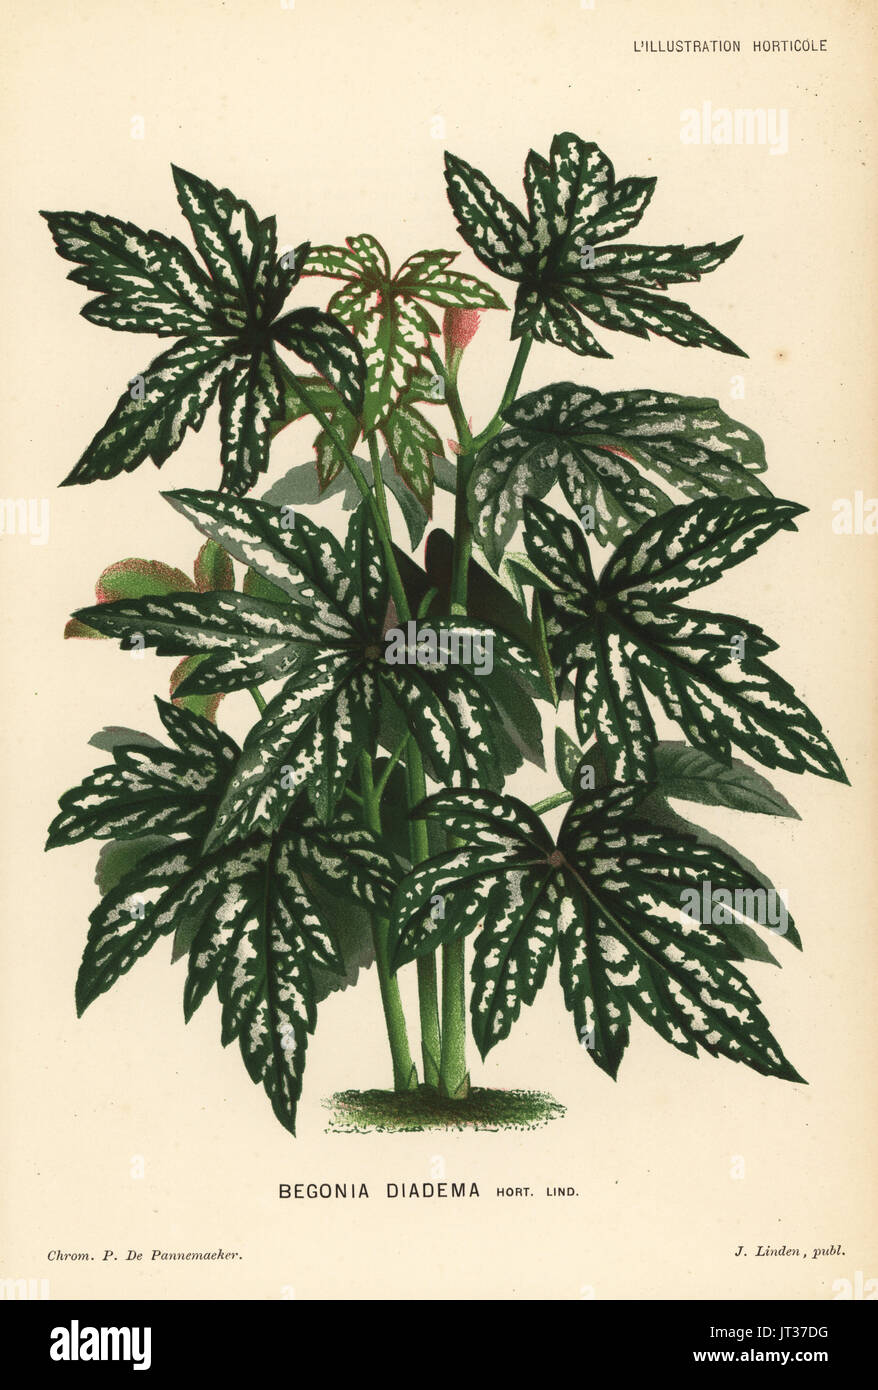 Begonia diadema. Chromolithograph by P. de Pannemaeker from Jean Linden's l'Illustration Horticole, Brussels, 1882. Stock Photo